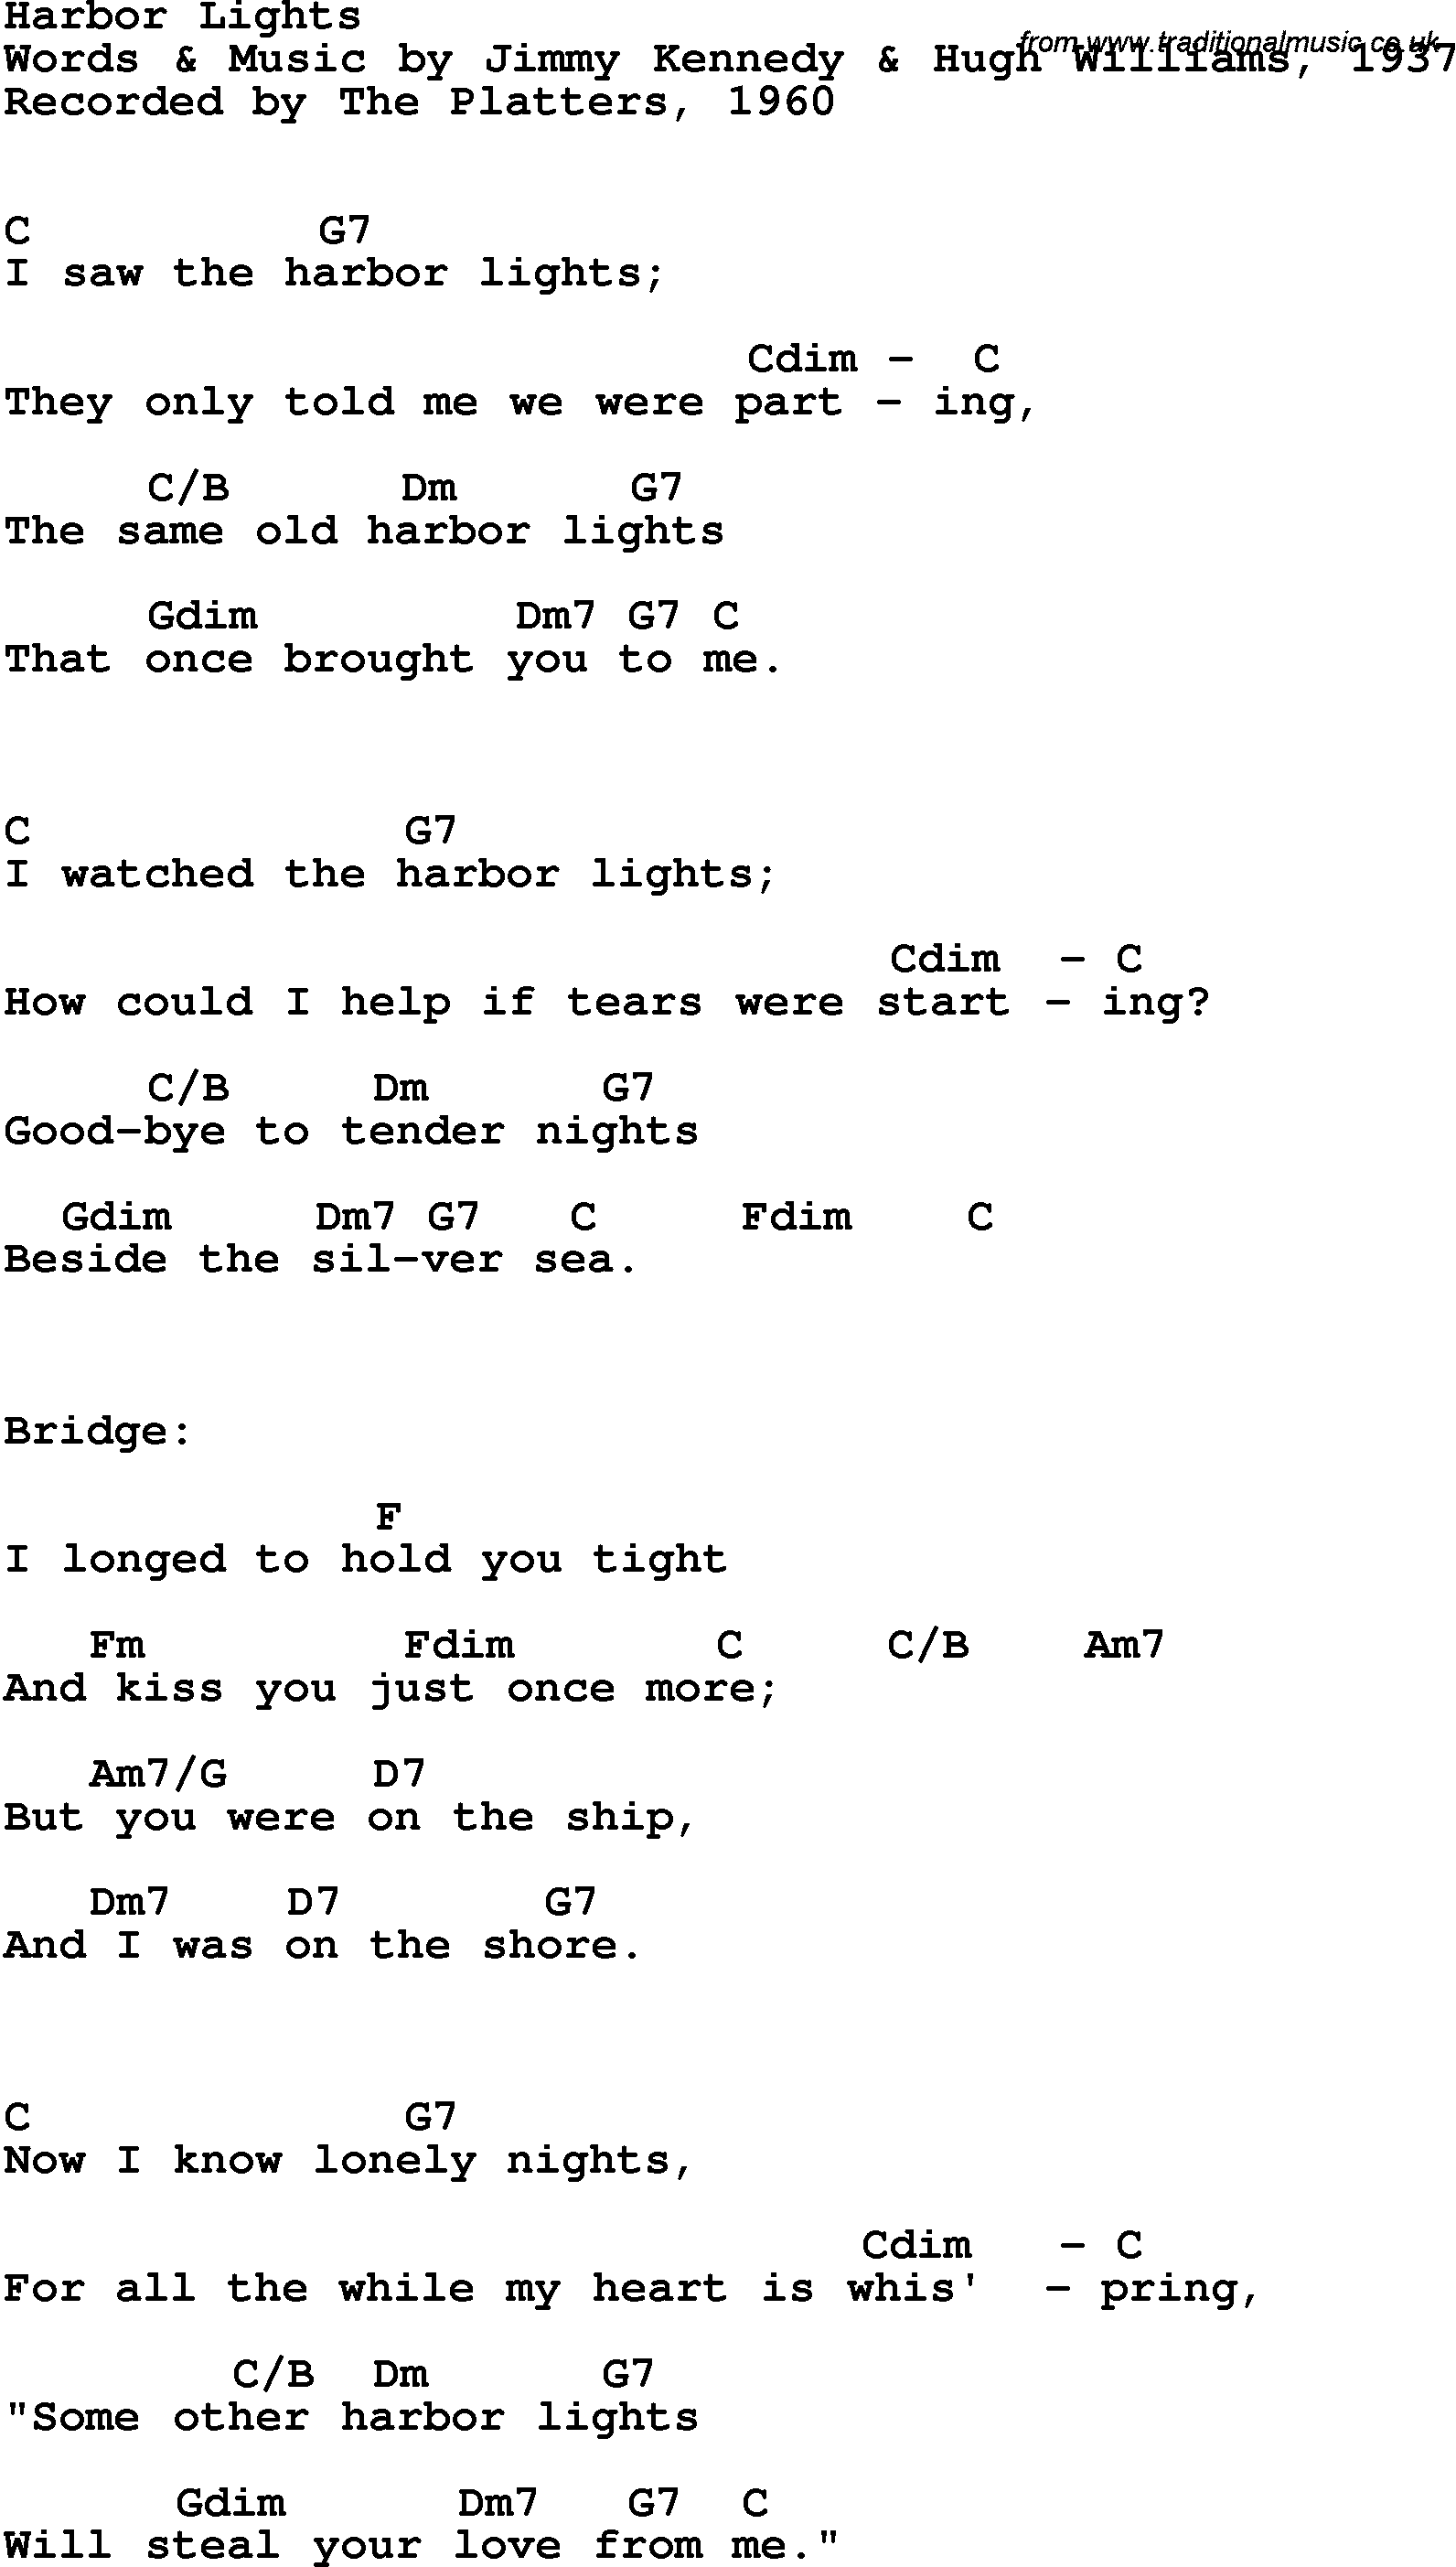 Song Lyrics with guitar chords for Harbor Lights - The Platters, 1960